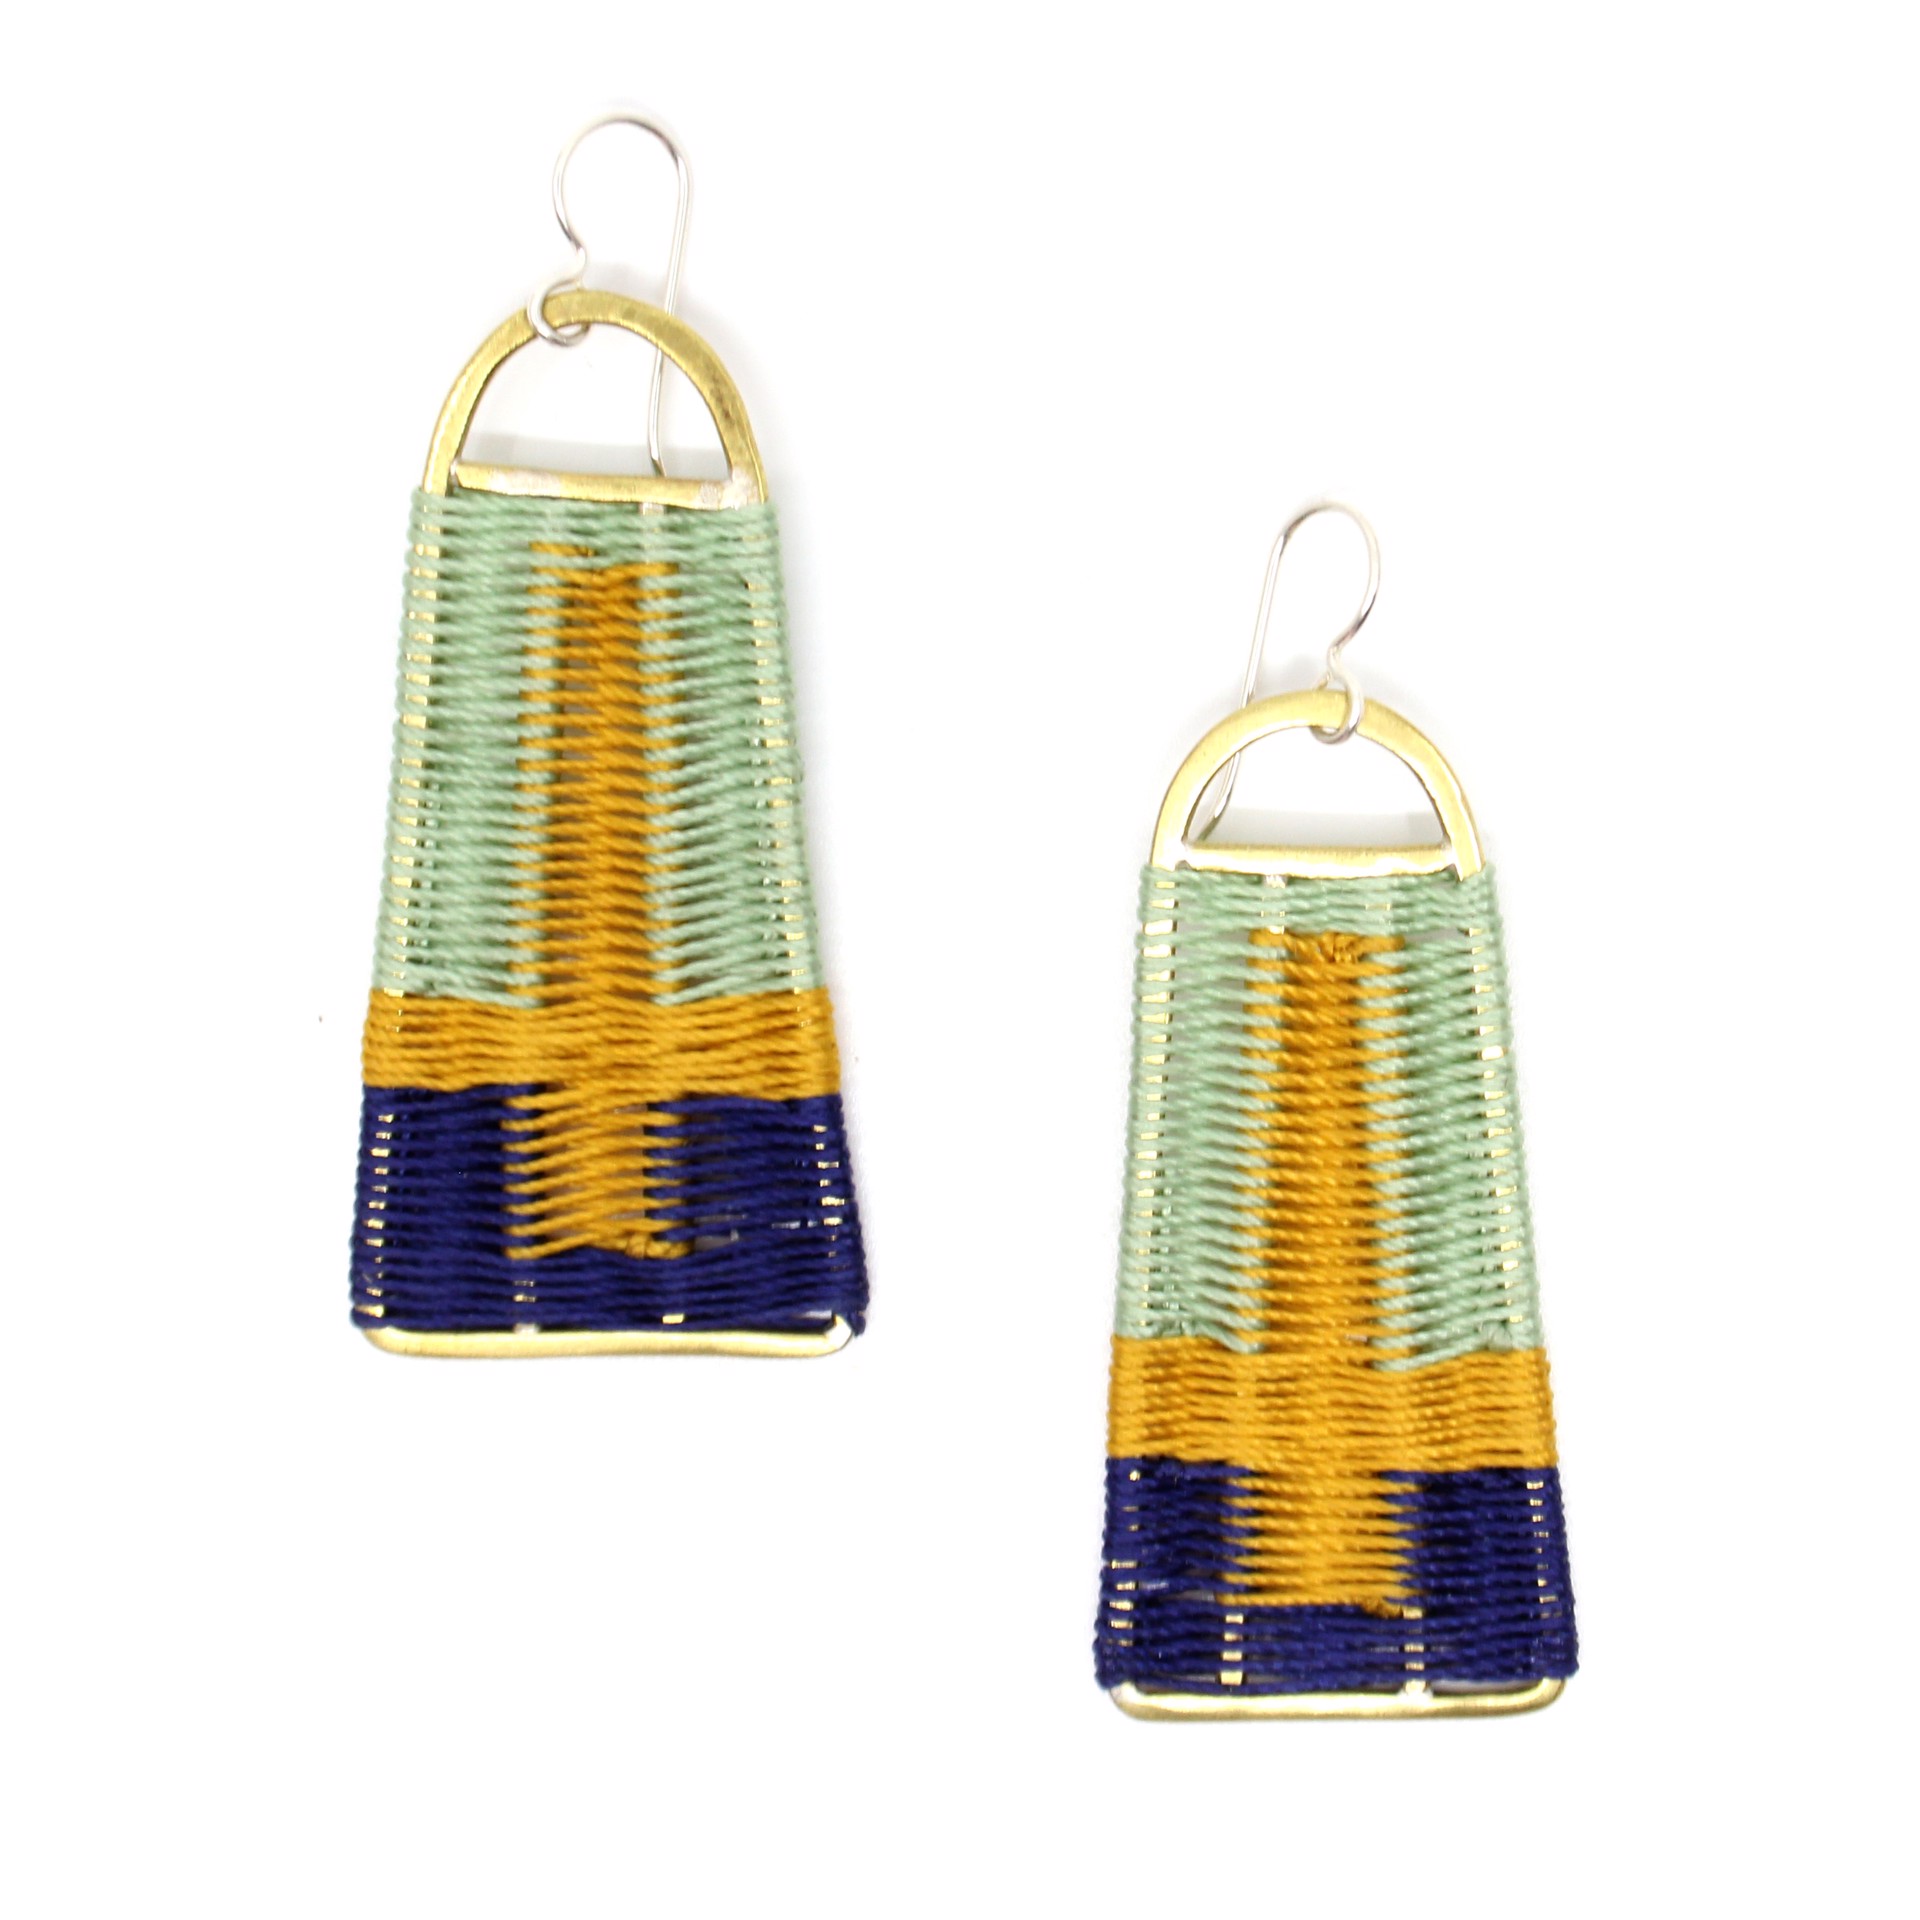 Well earrings (mint, yellow, navy) by Flag Mountain Jewelry